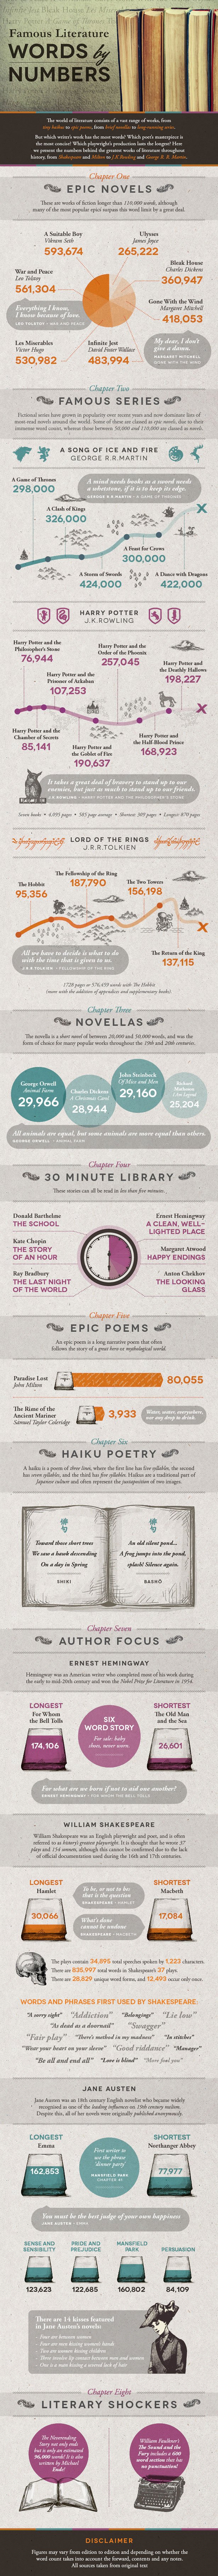 Famous Literature: Words By Numbers